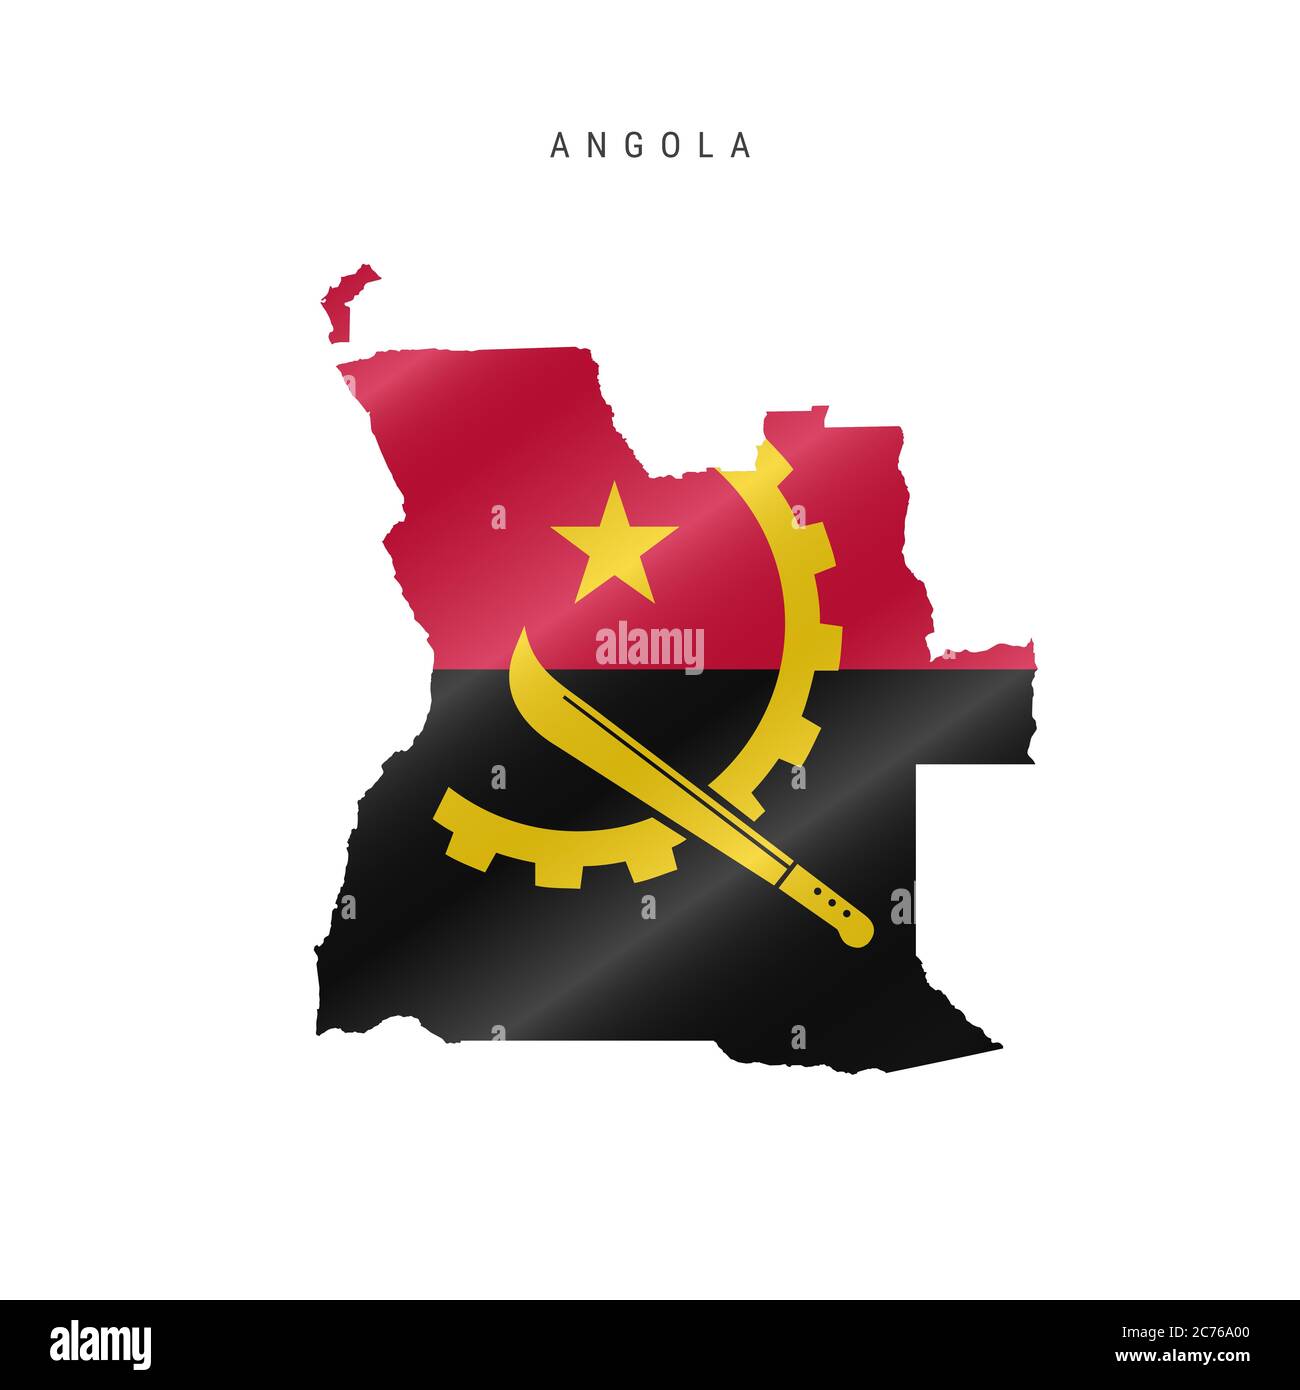 Detailed waving flag map of Angola. map with masked flag. Stock Photo